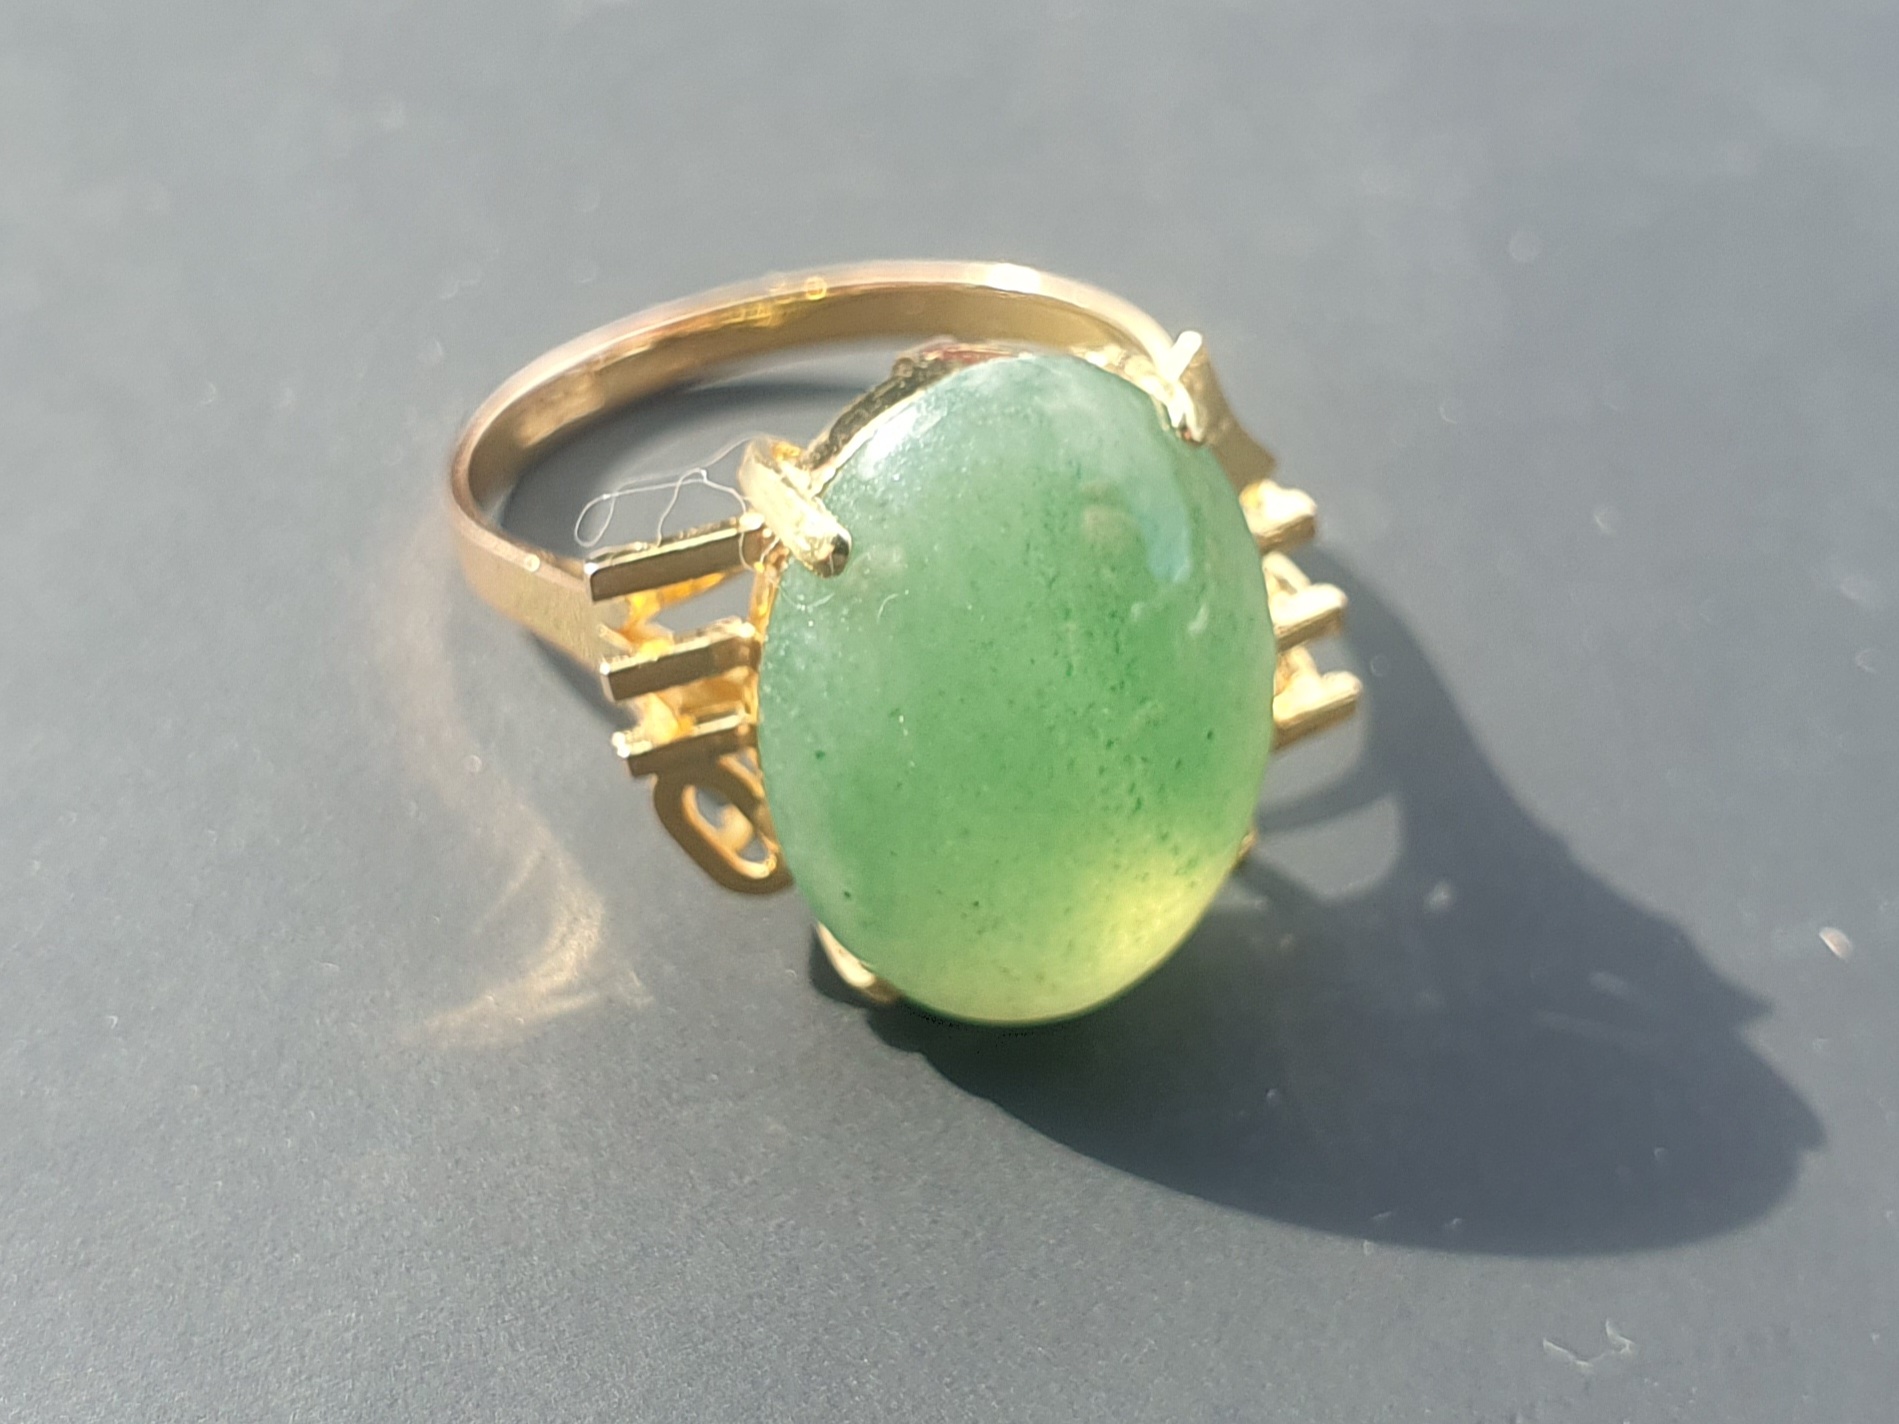 14ct Gold Jade Ring. Gross weight 3.79g, size L - Image 2 of 3